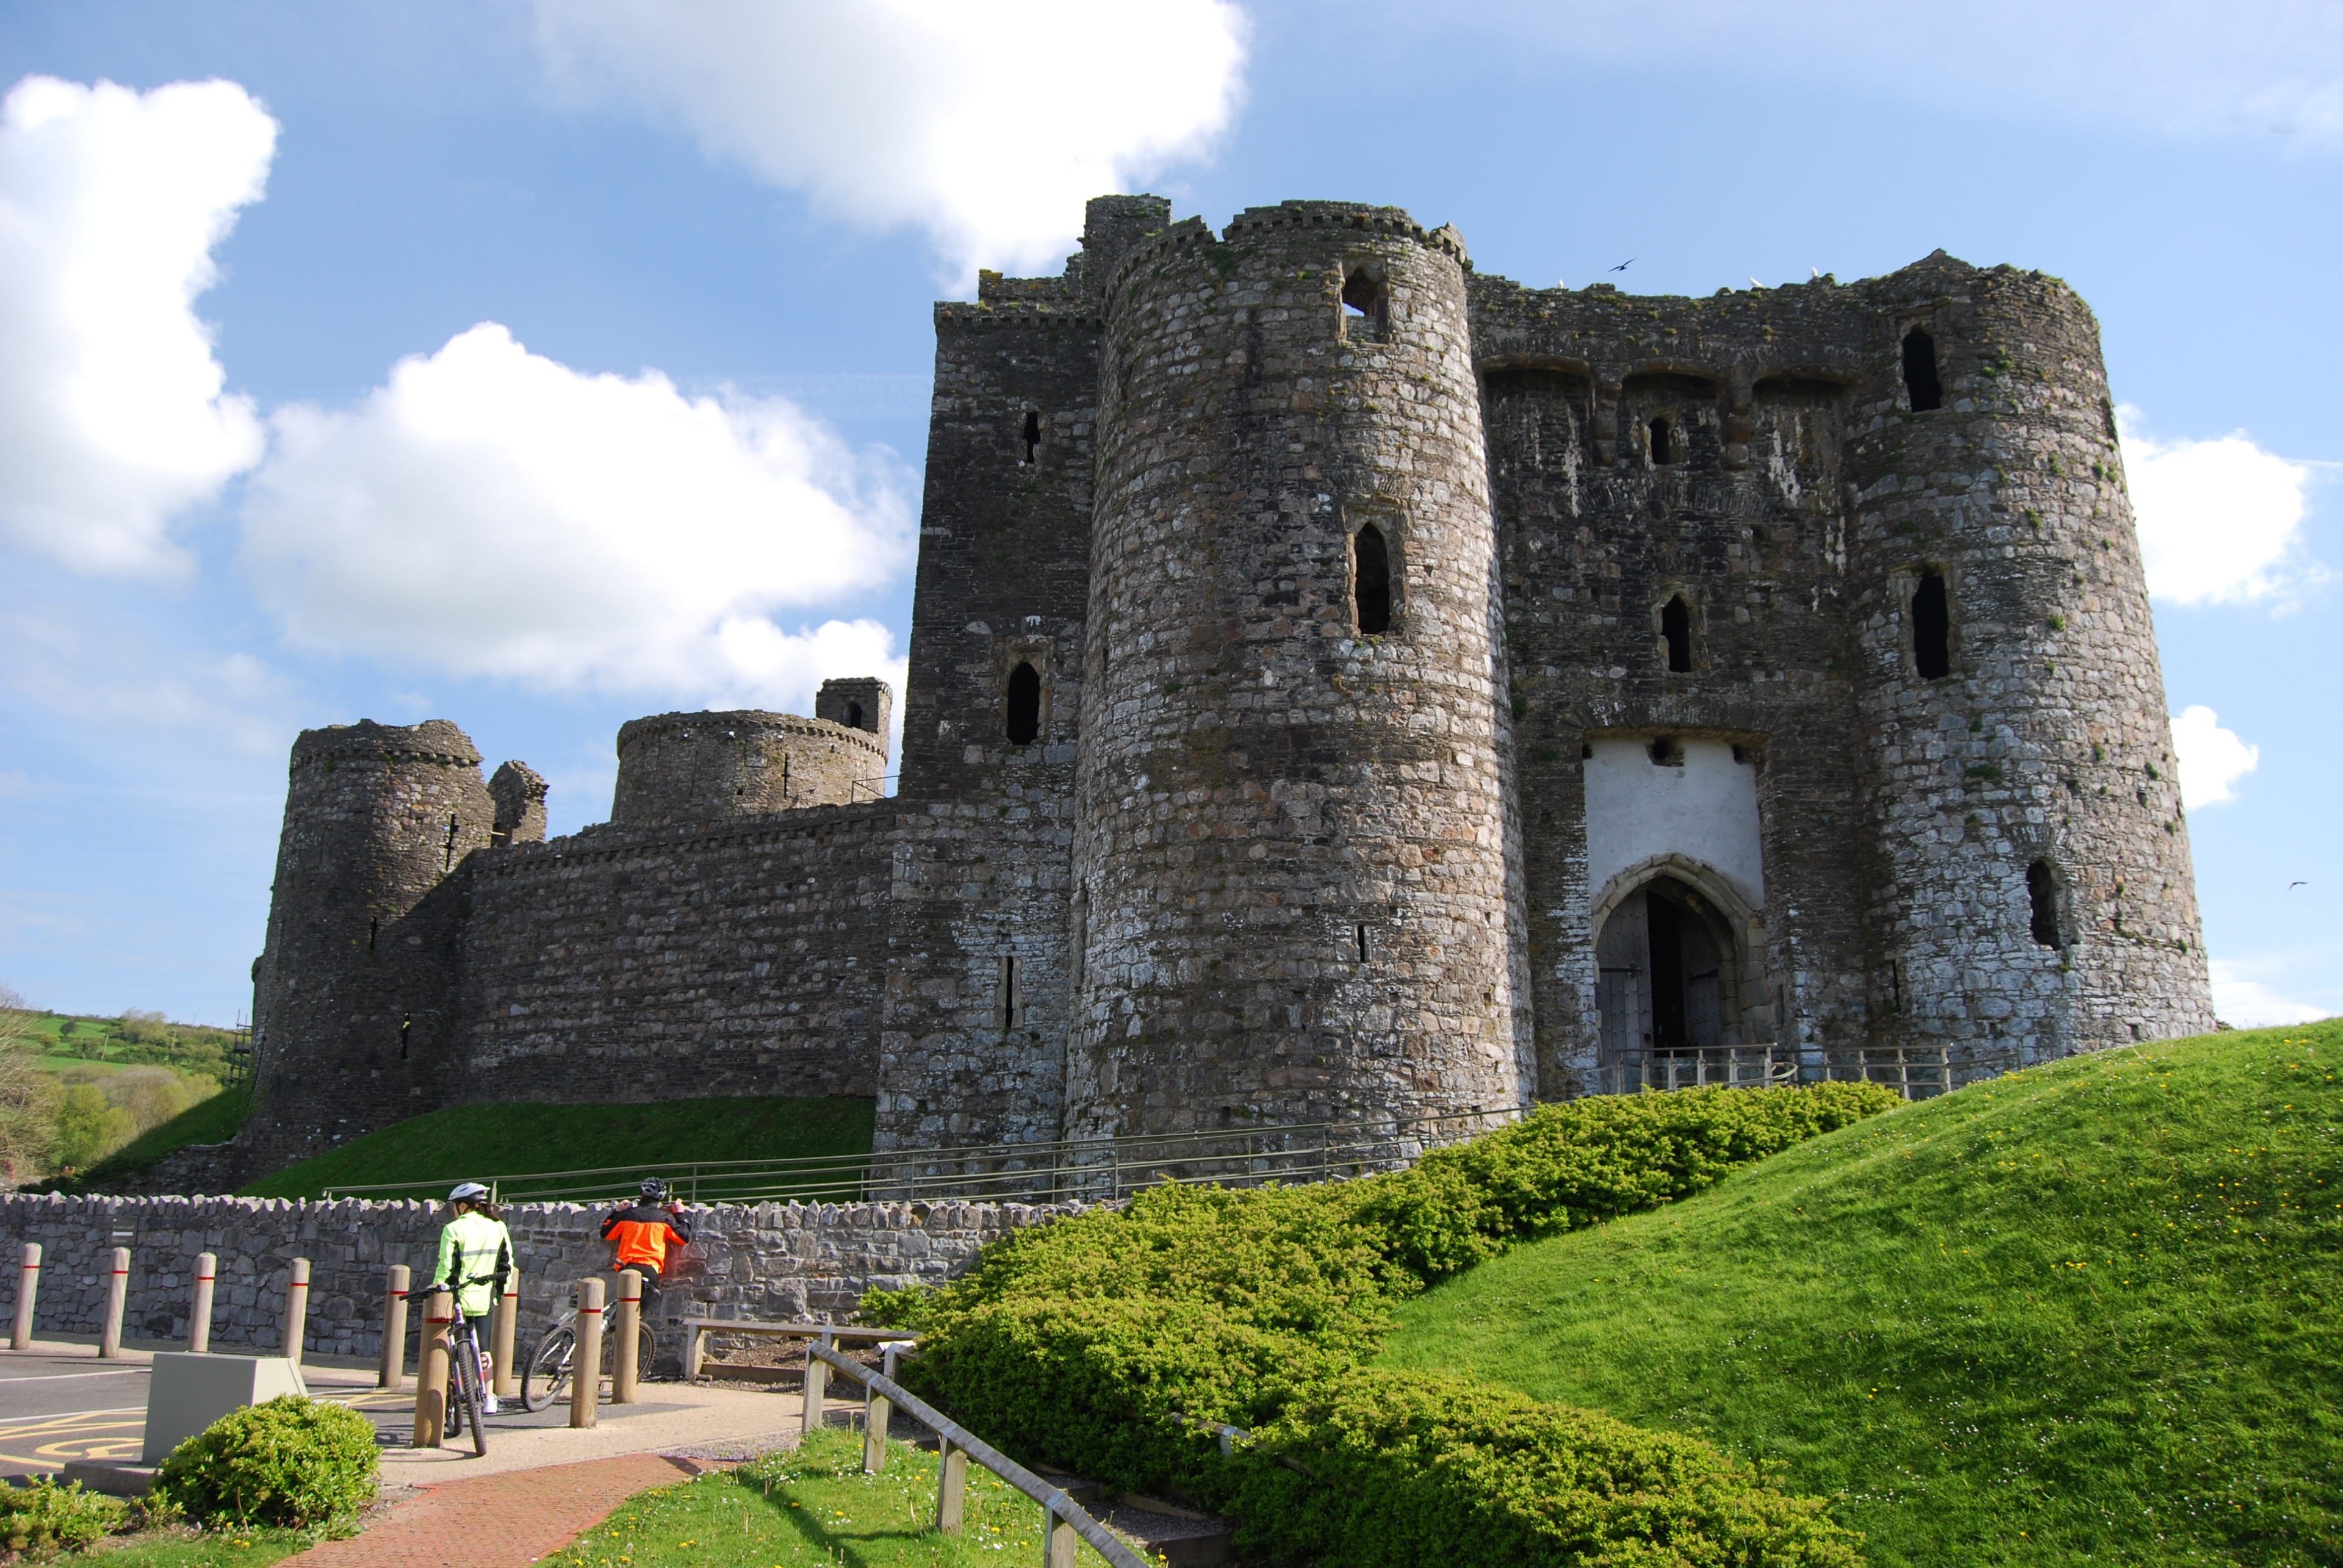 Kidwelly Castle, Kidwelly, Galles, Regno Unito